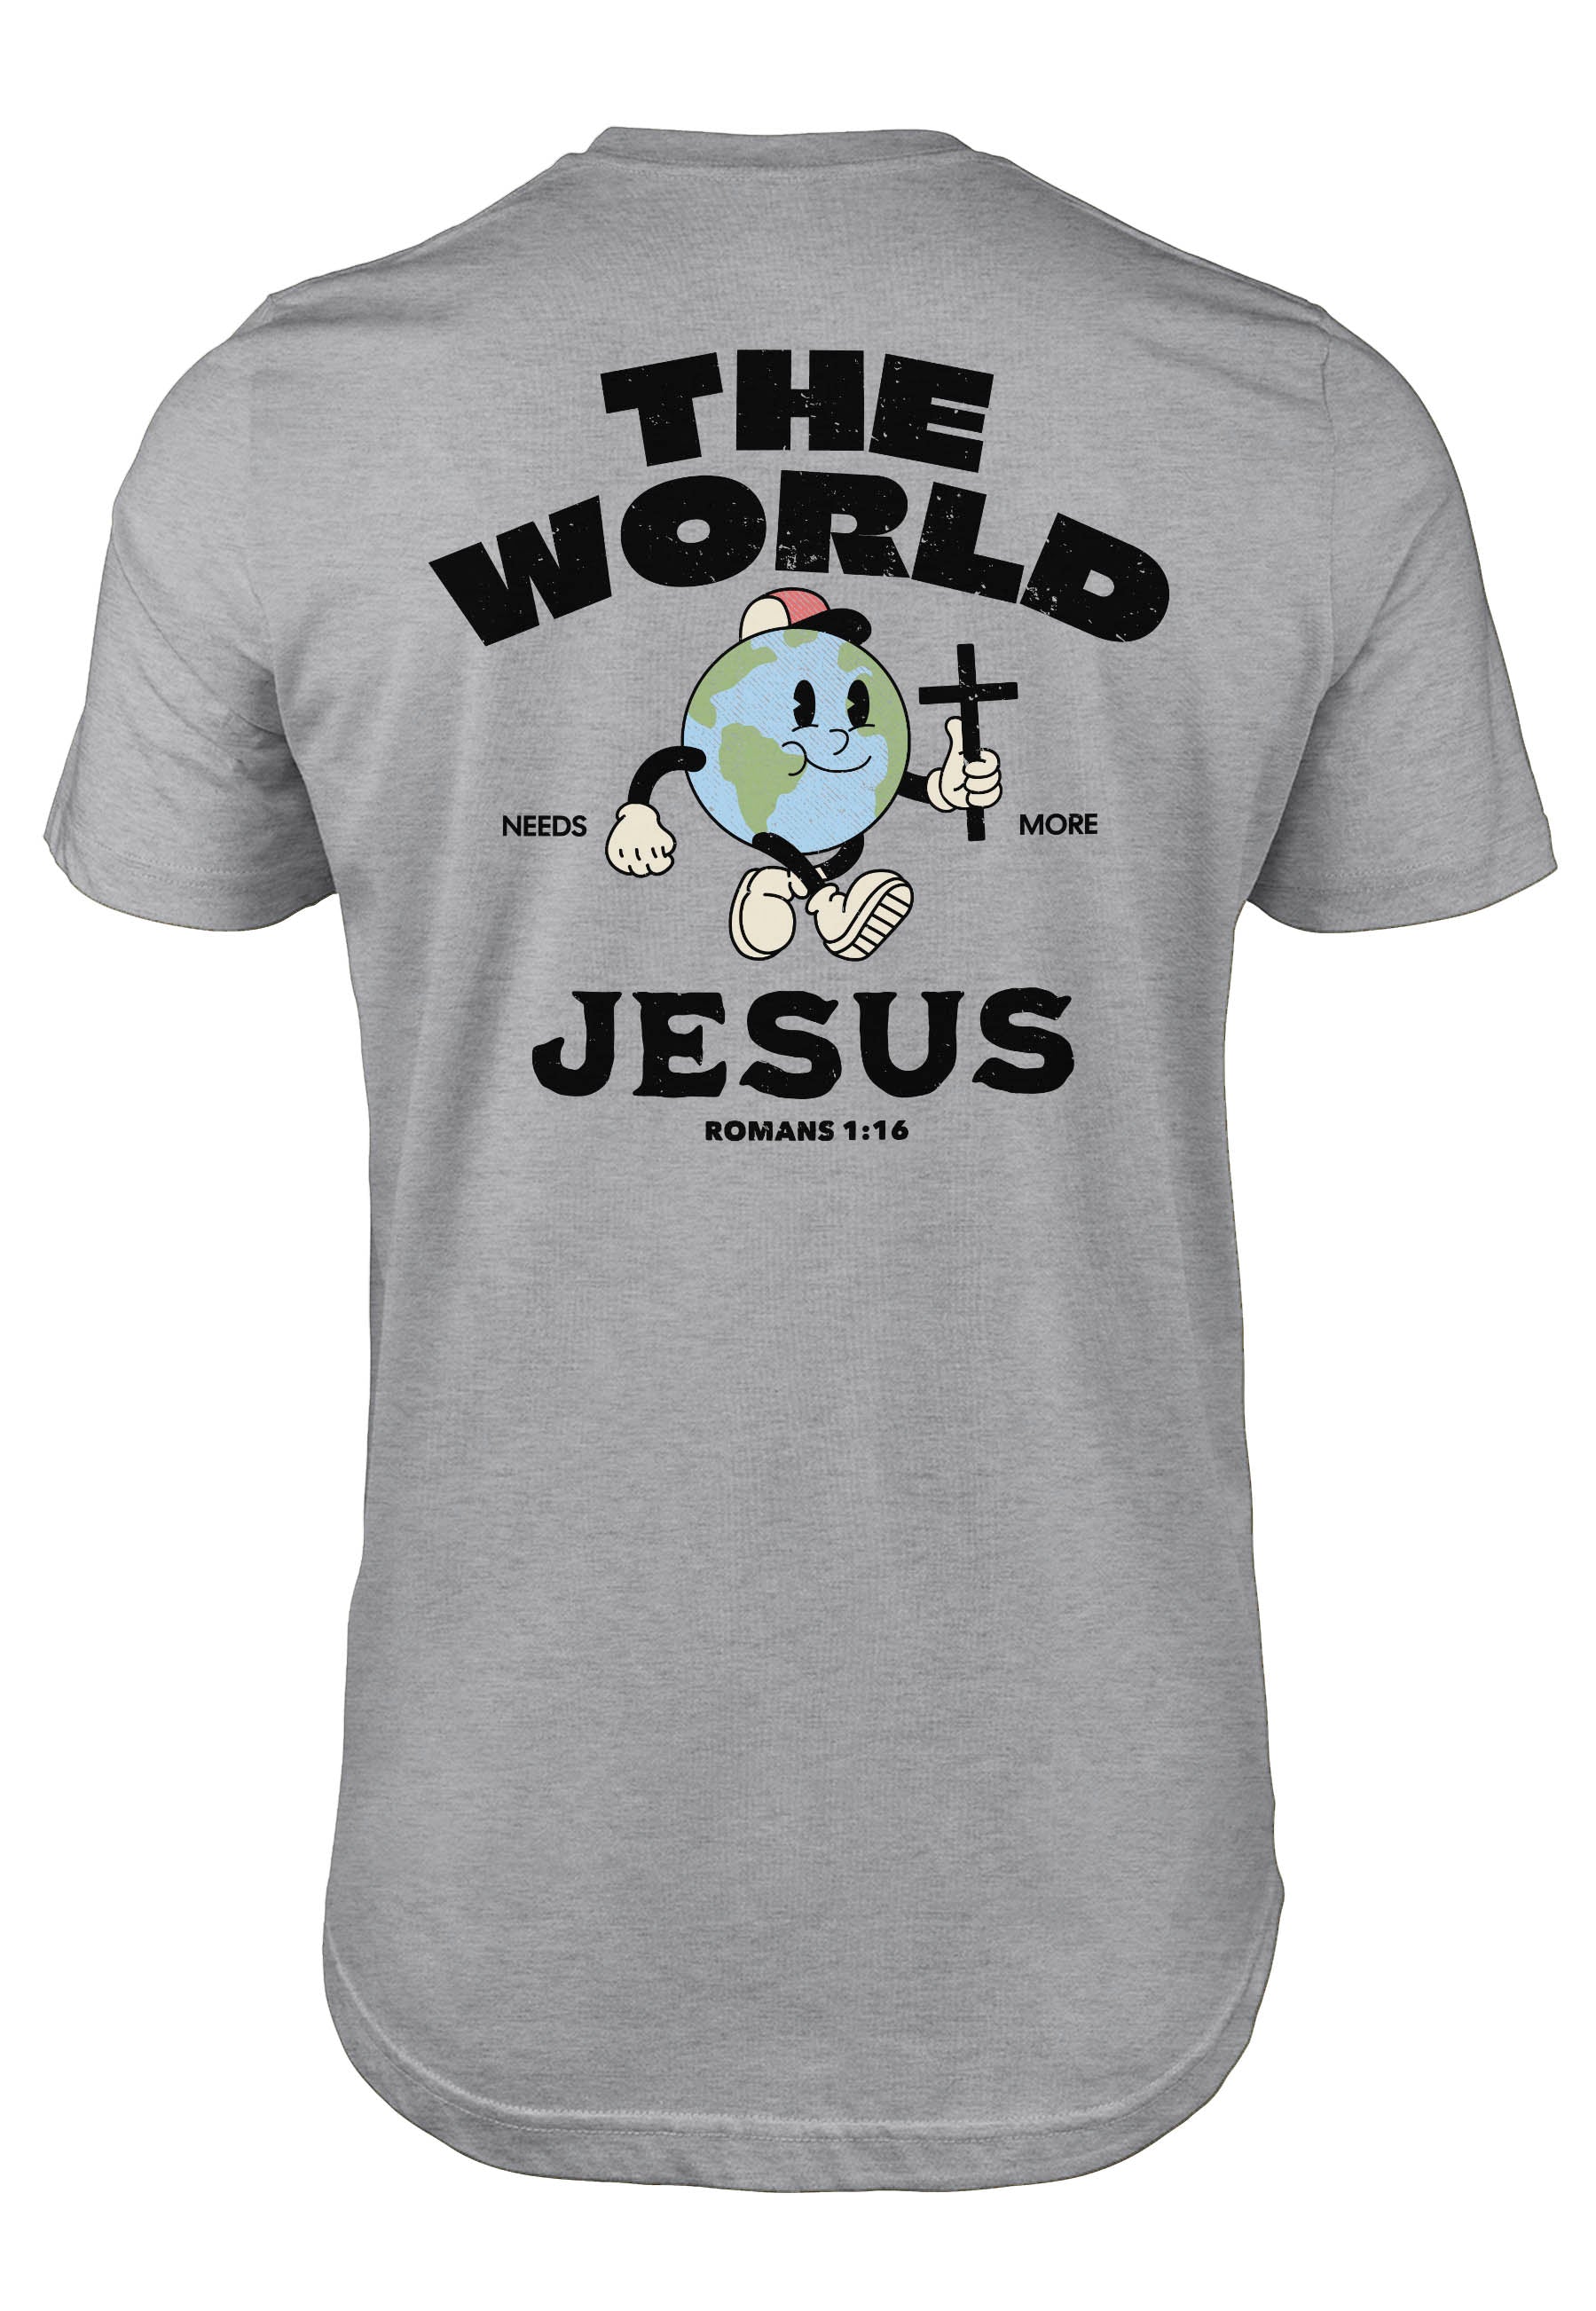 The world needs more Jesus t-shirt from His Army® brand